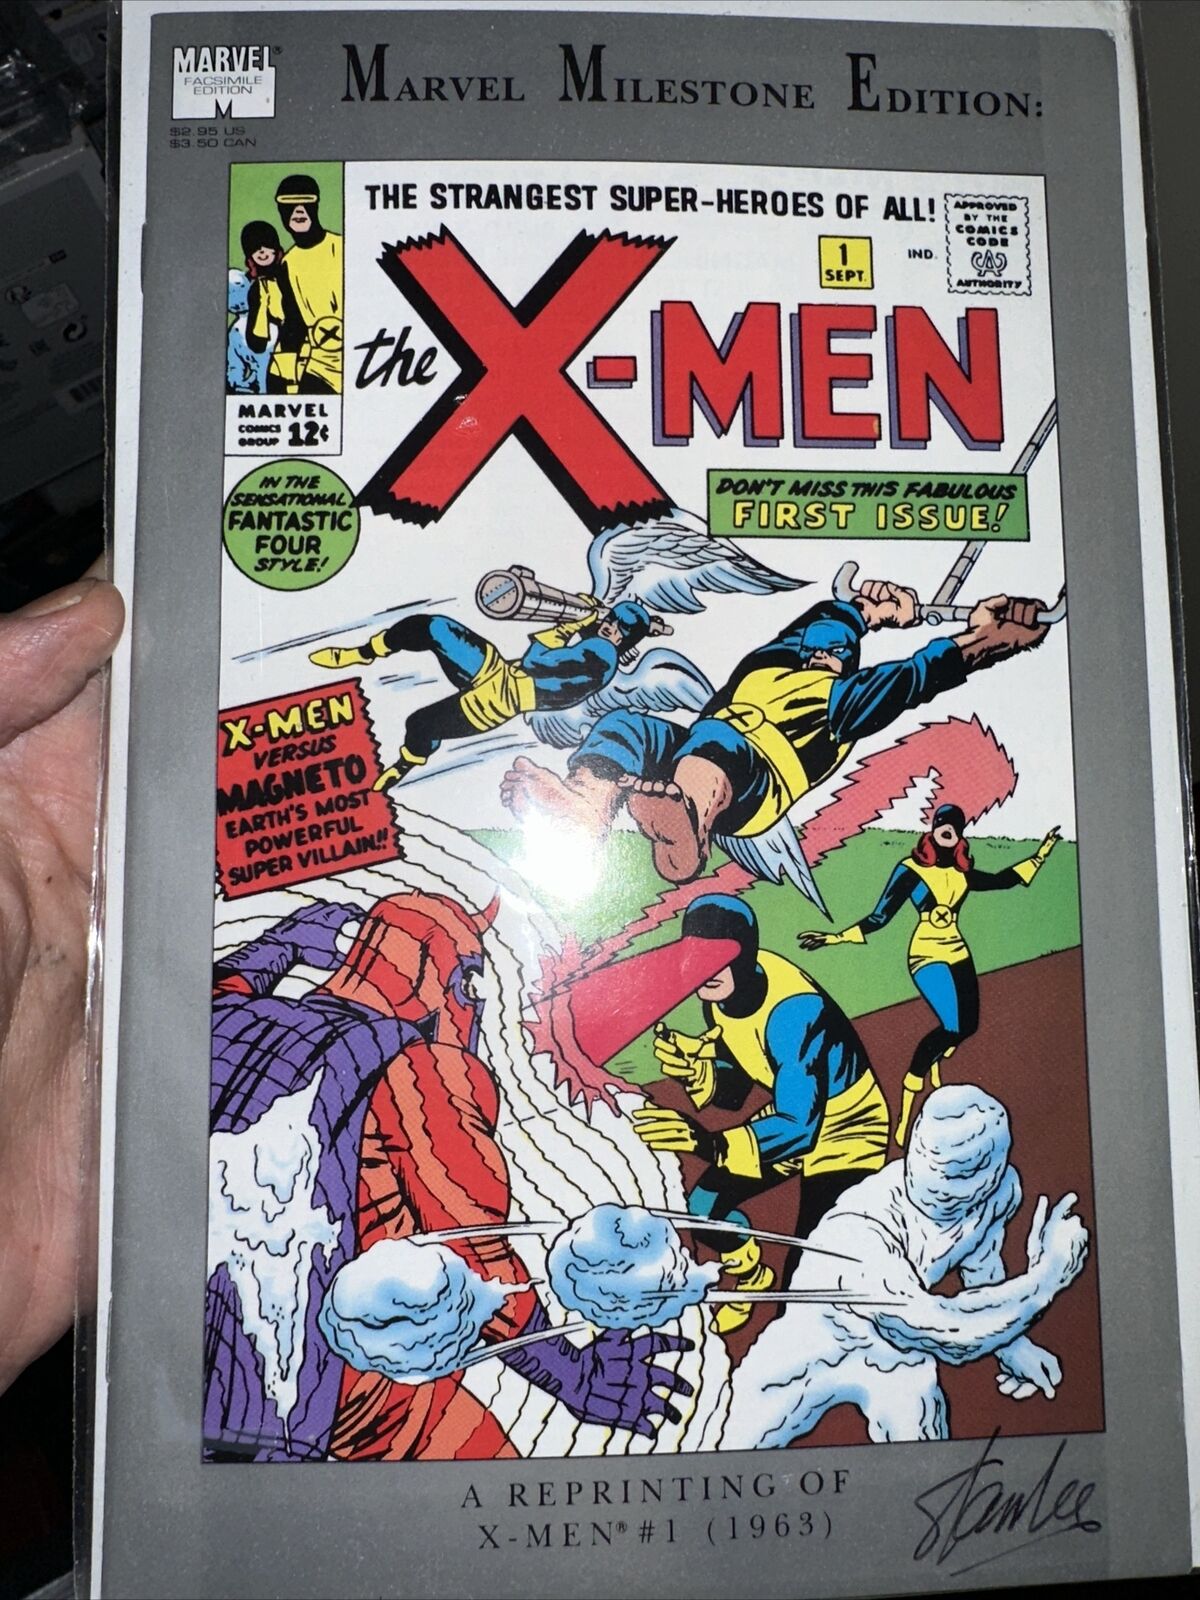 1991 MARVEL MILESTONE EDITION: X-MEN  #1 Signed By Stan Lee